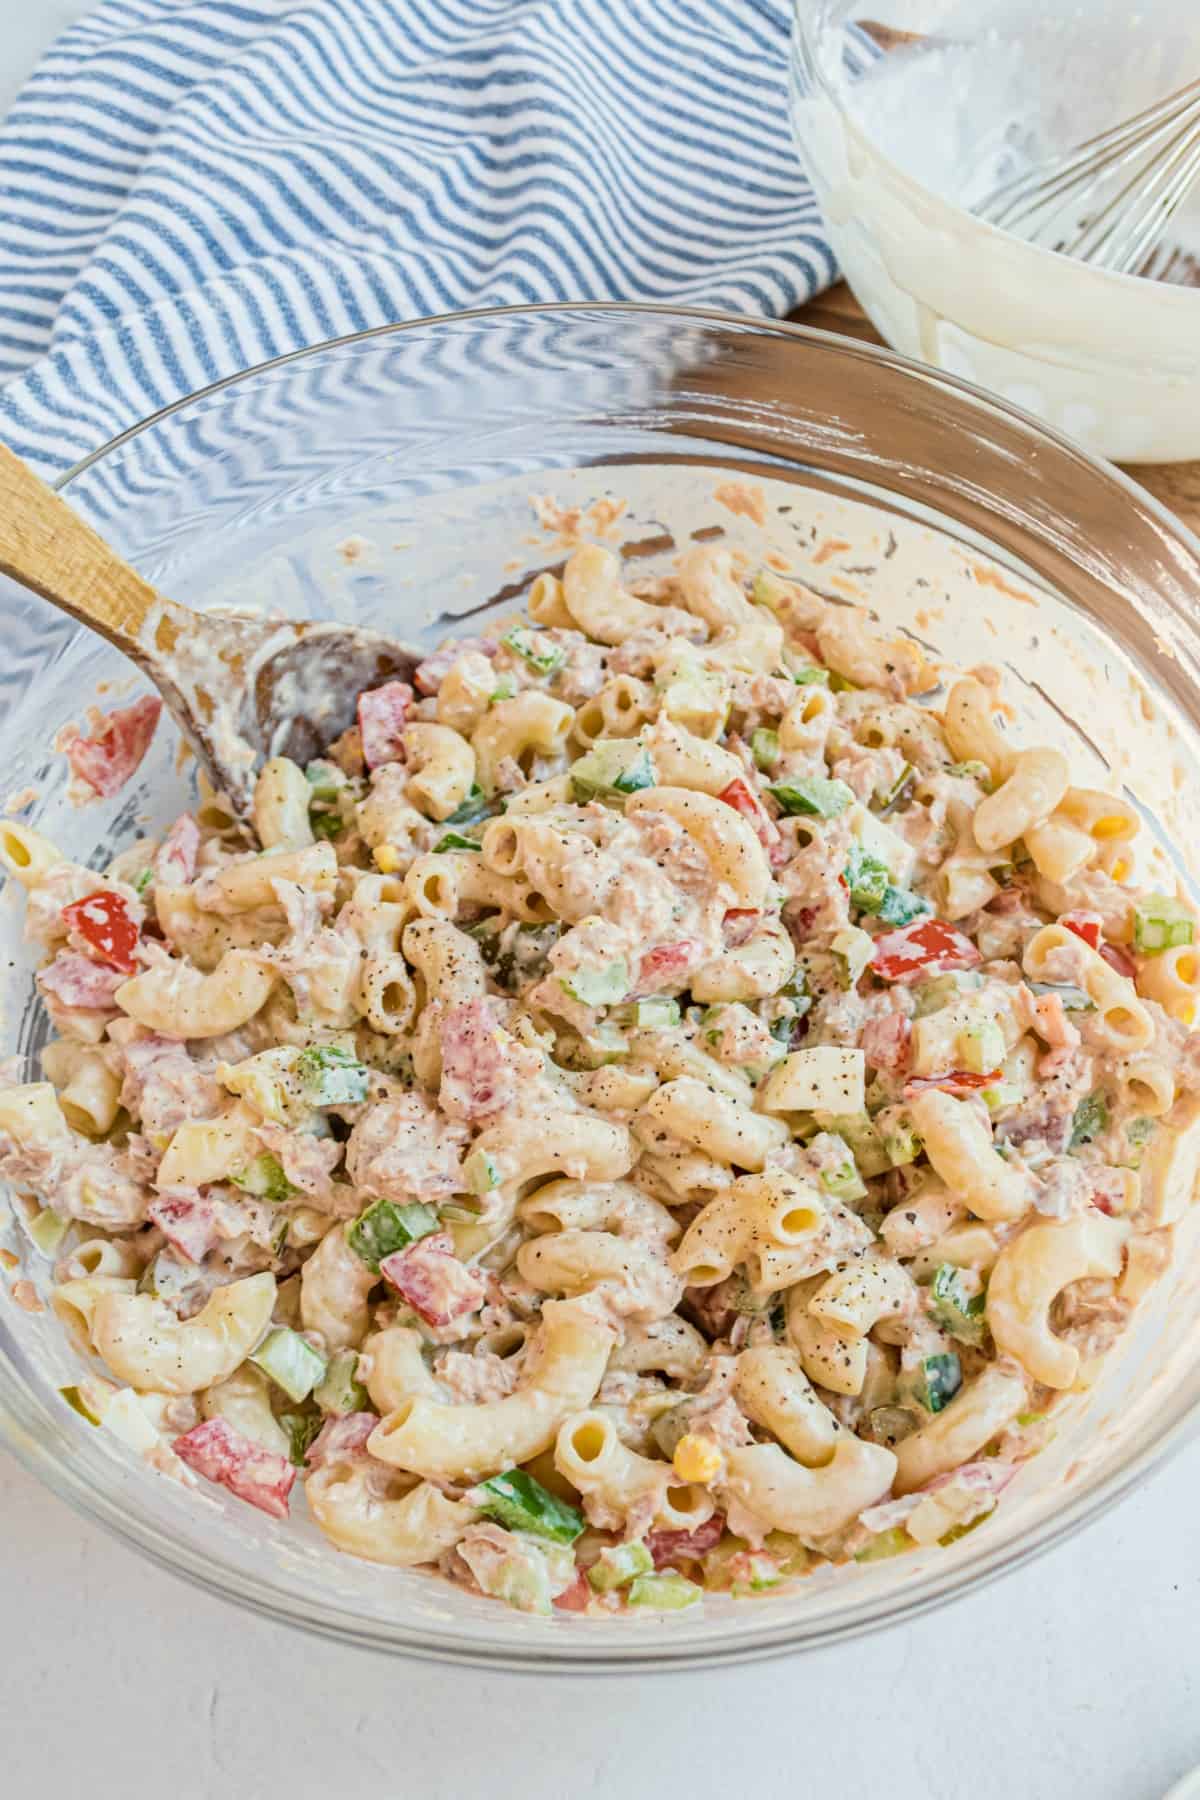 Macaroni salad in a clear glass bowl with tuna, eggs, and creamy dressing.